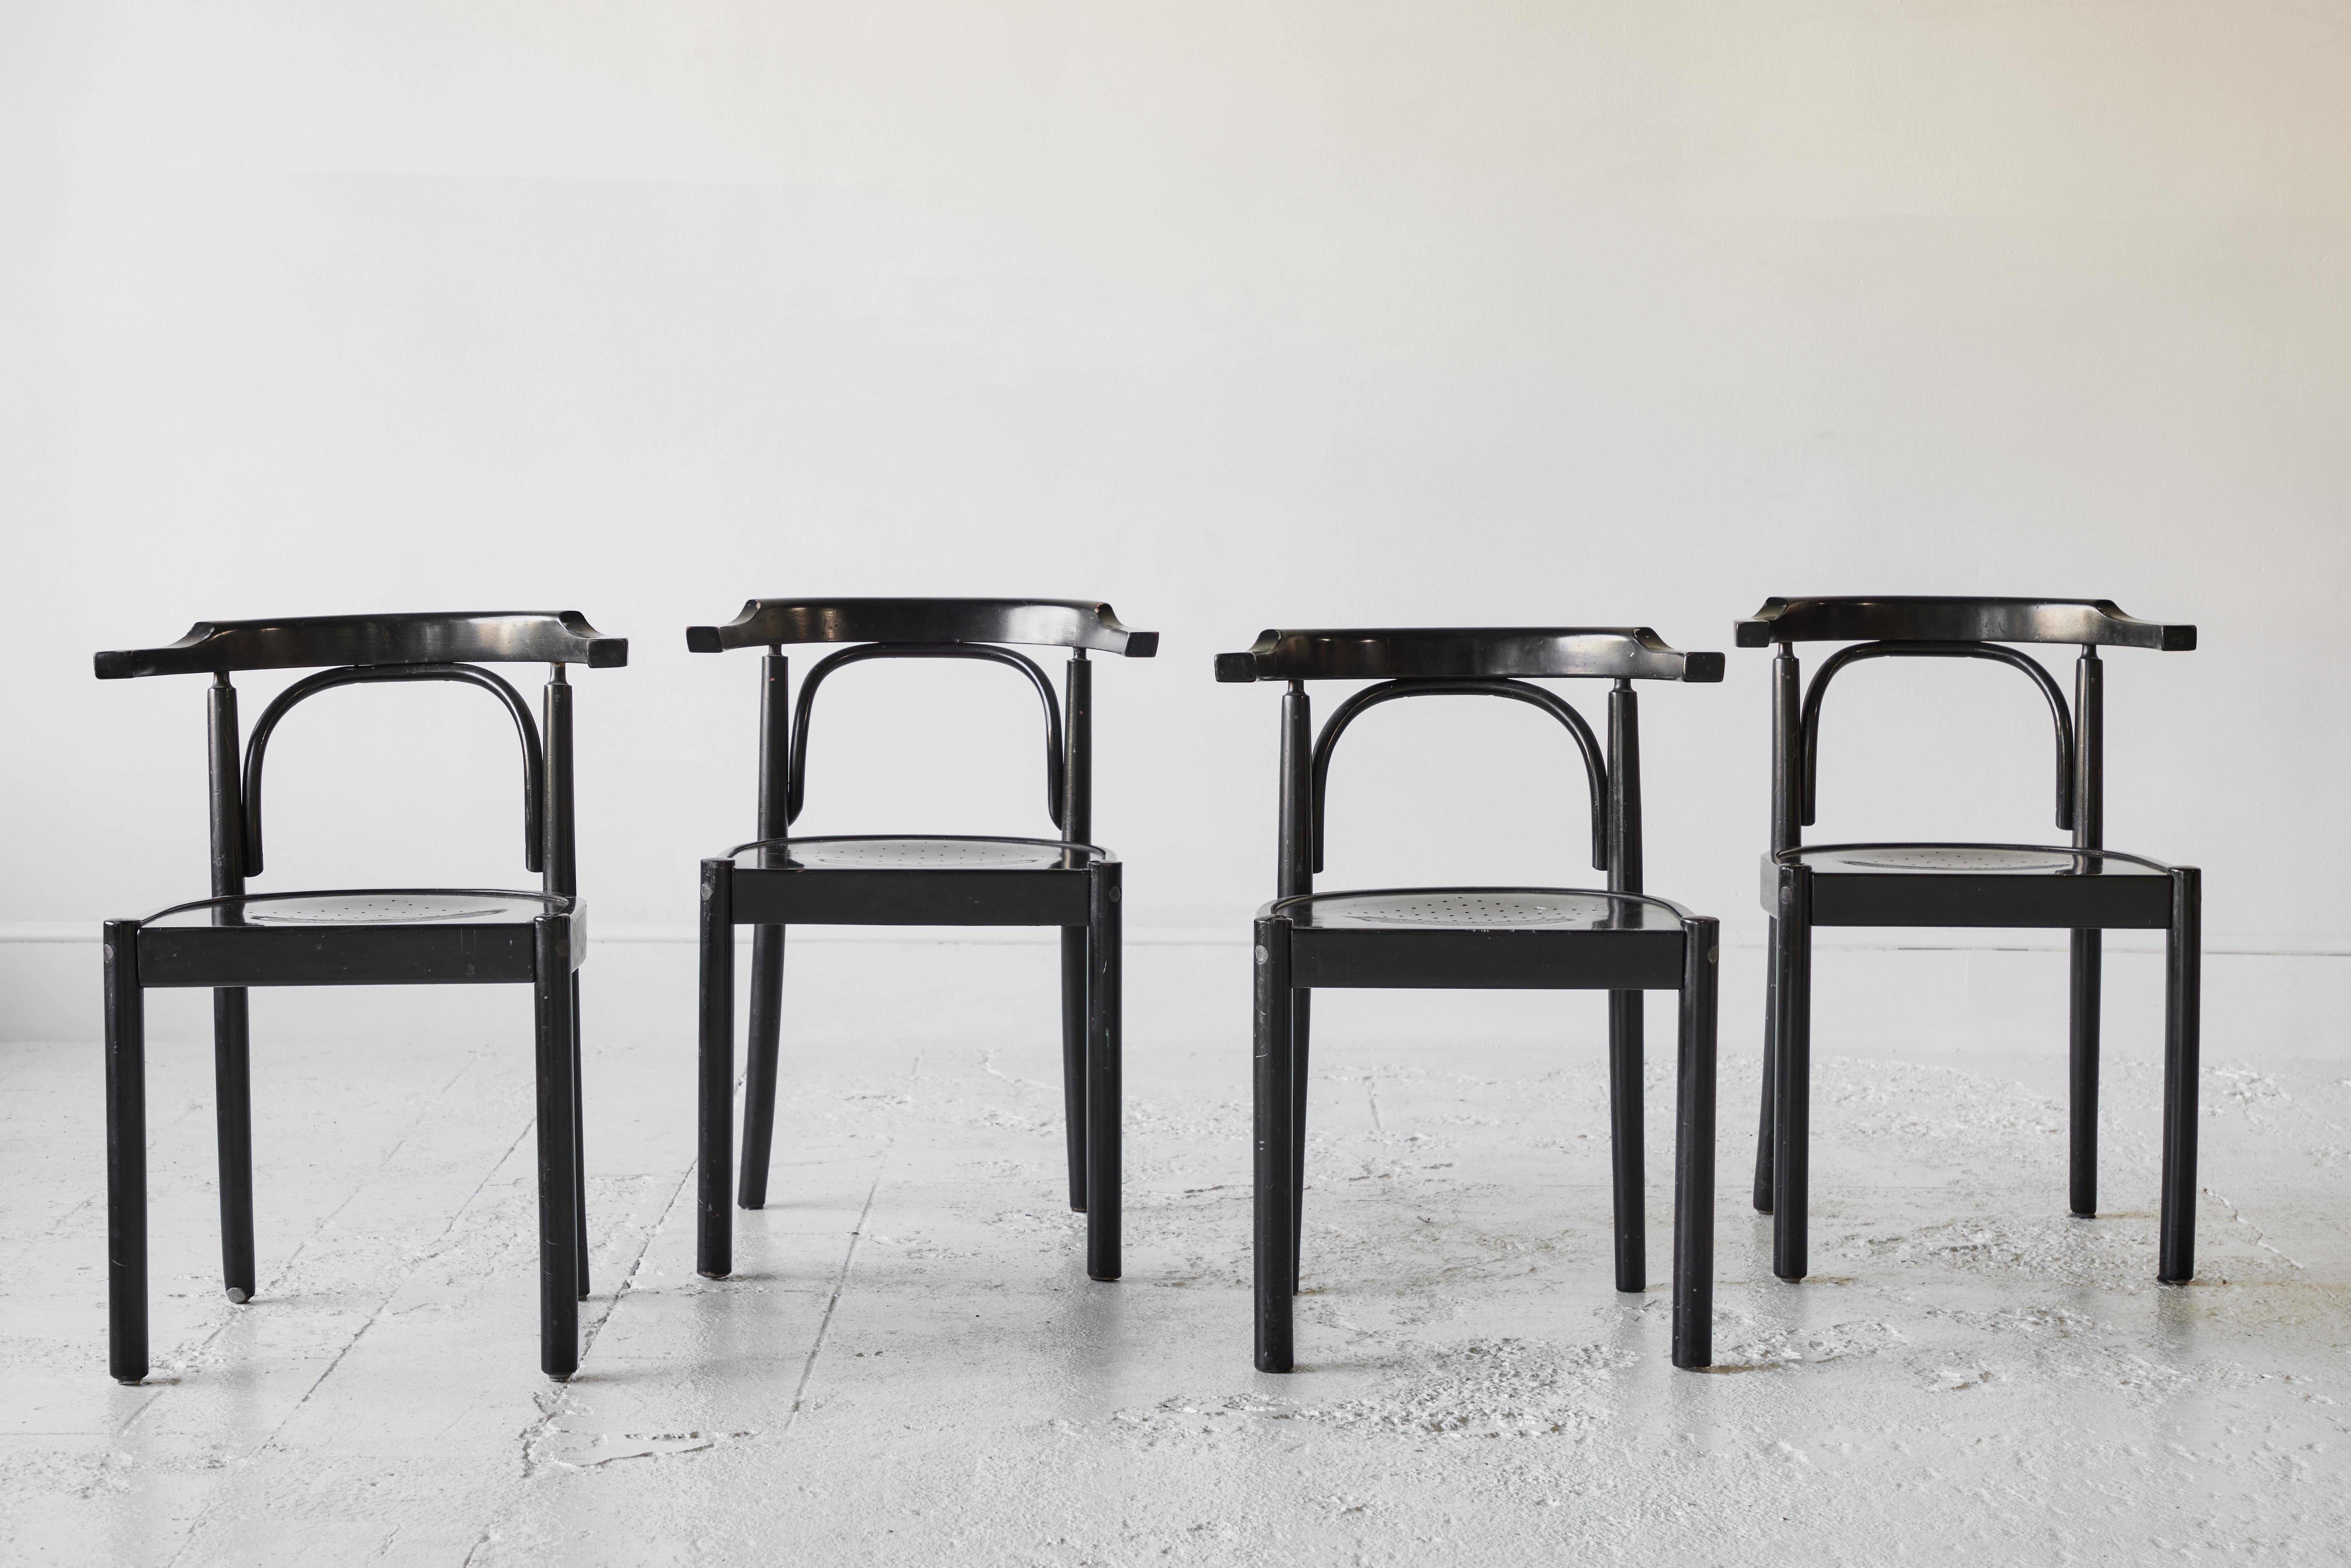 Beautiful set of four black painted, curved back chairs. With distinct bentwood details, perforated seats, and a simplistic yet chic form, these are the perfect addition to a breakfast room. These are cleaned and waxed and ready for use.